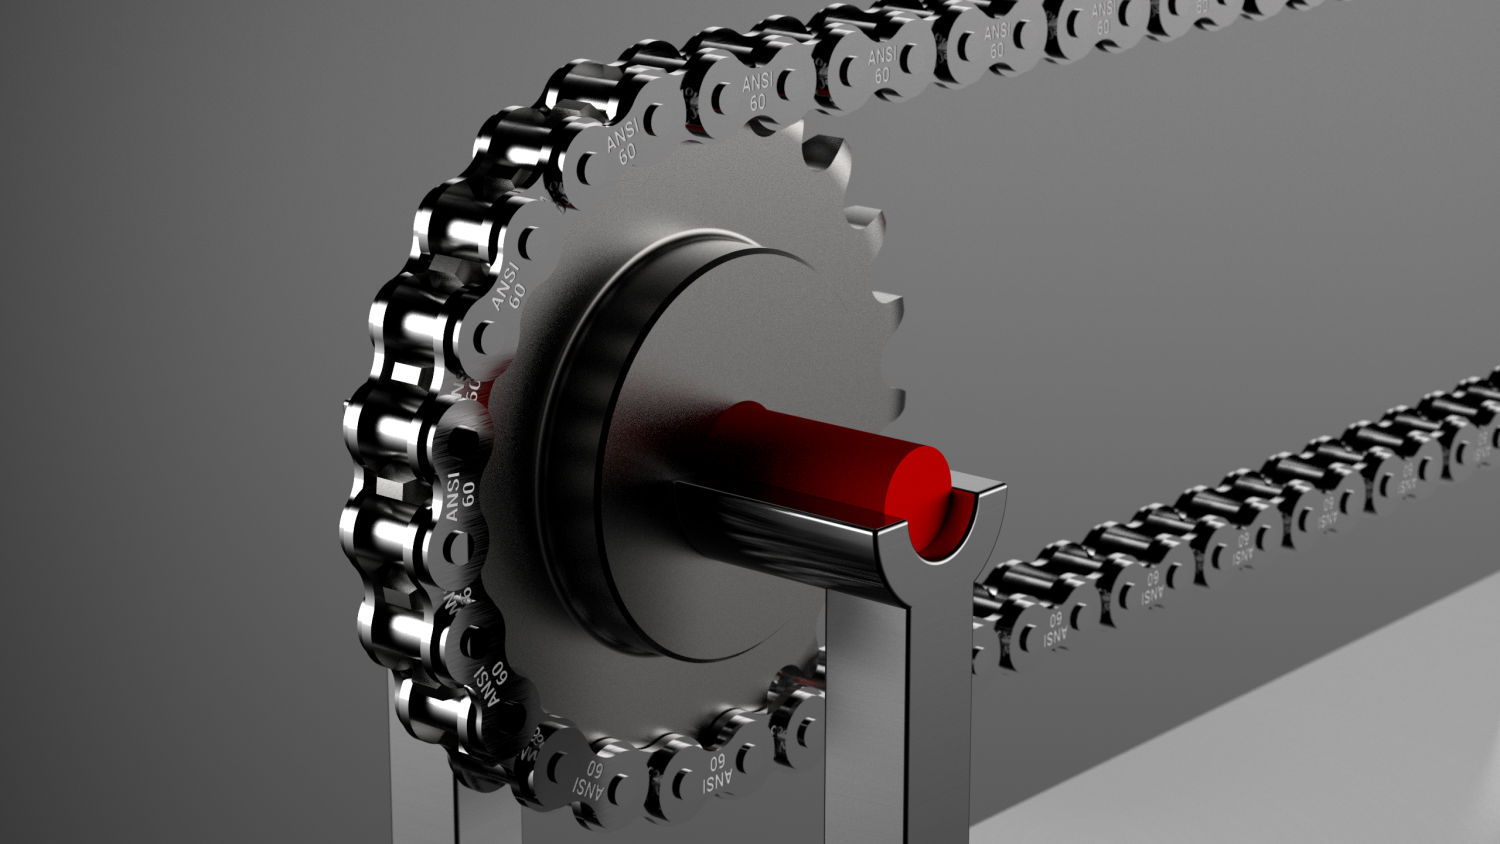 3D Model of the gear assembly